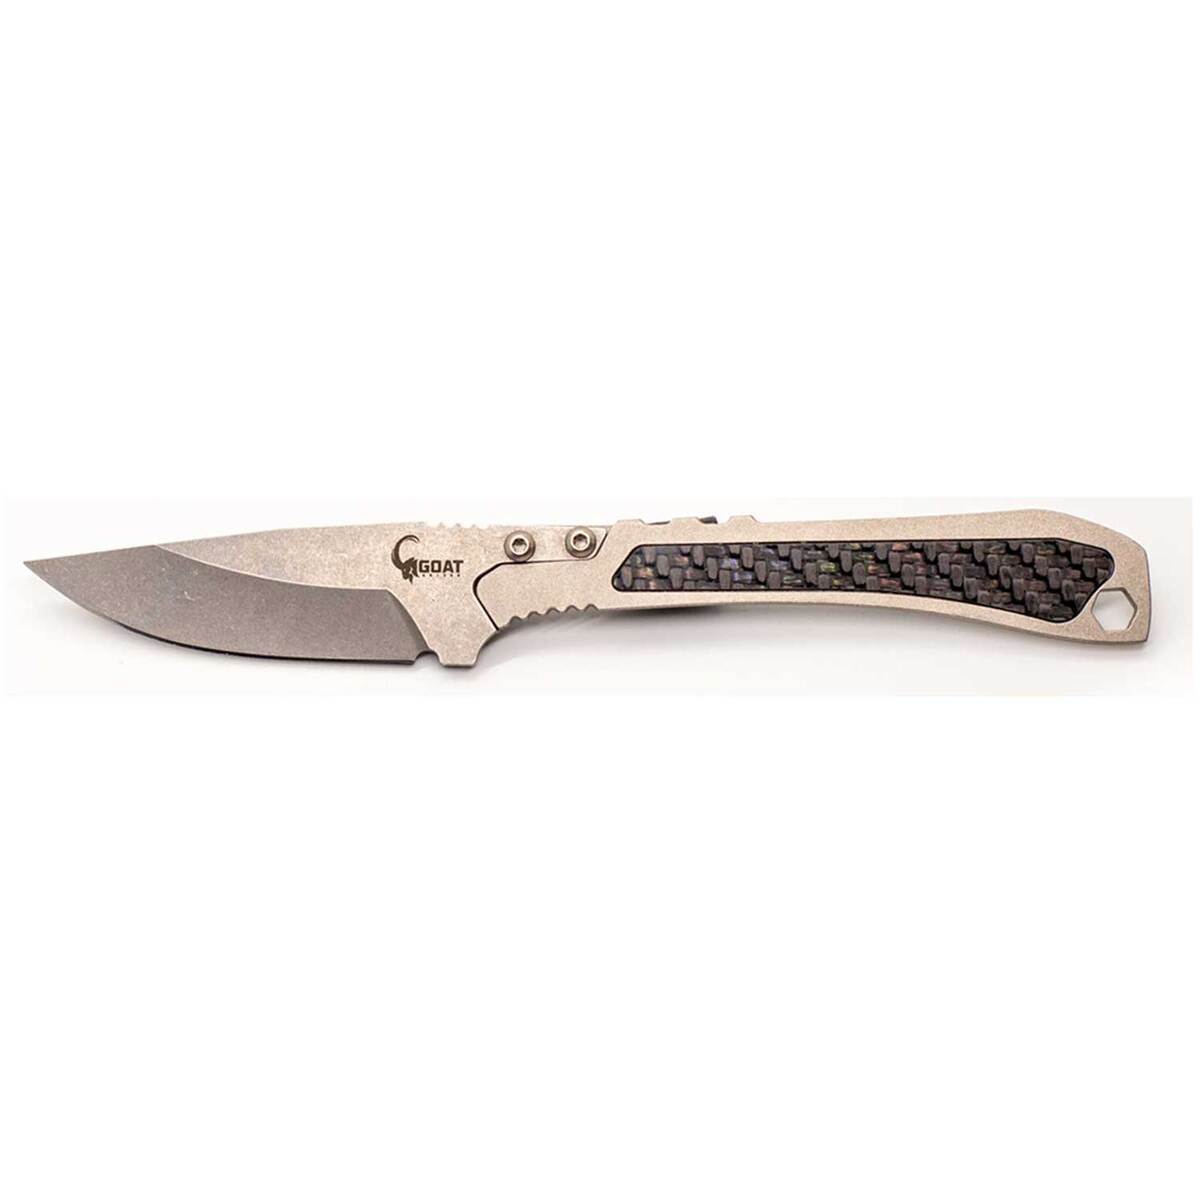 Pocket Knife with Replaceable Blades - North Ridge Fire Equipment